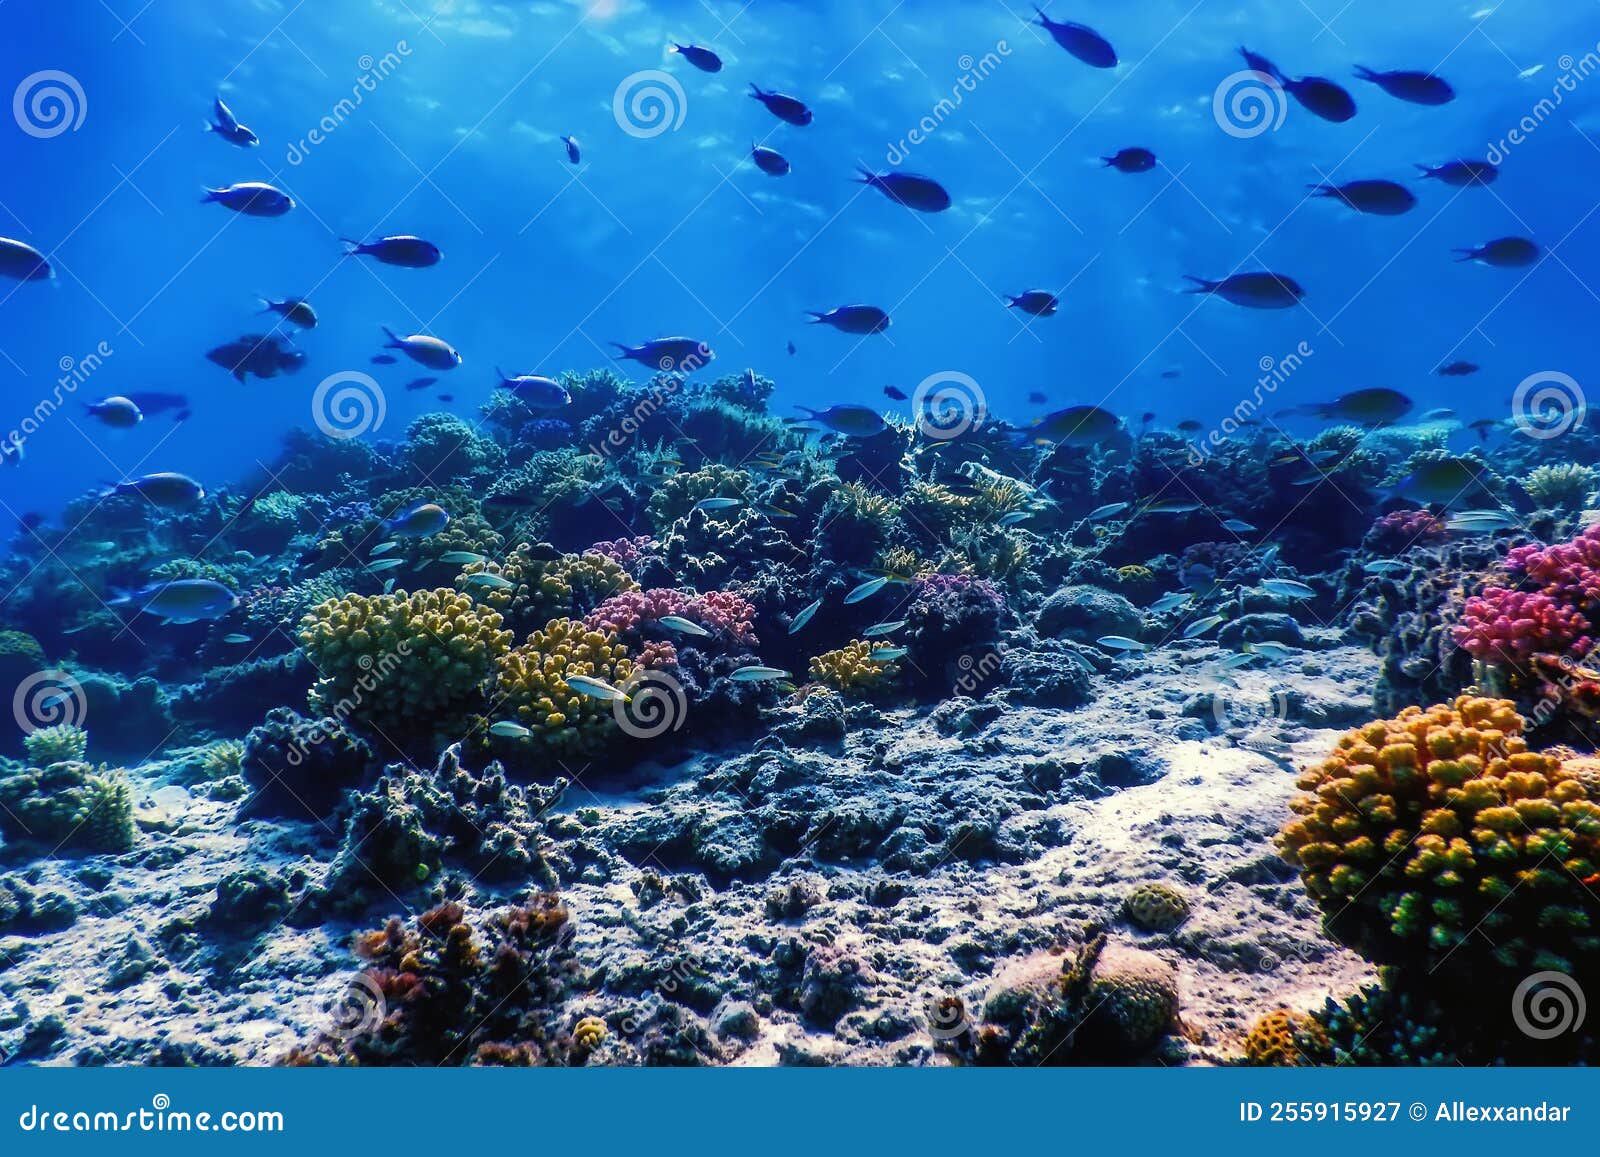 Underwater View of the Coral Reef, Tropical Waters Stock Image - Image ...